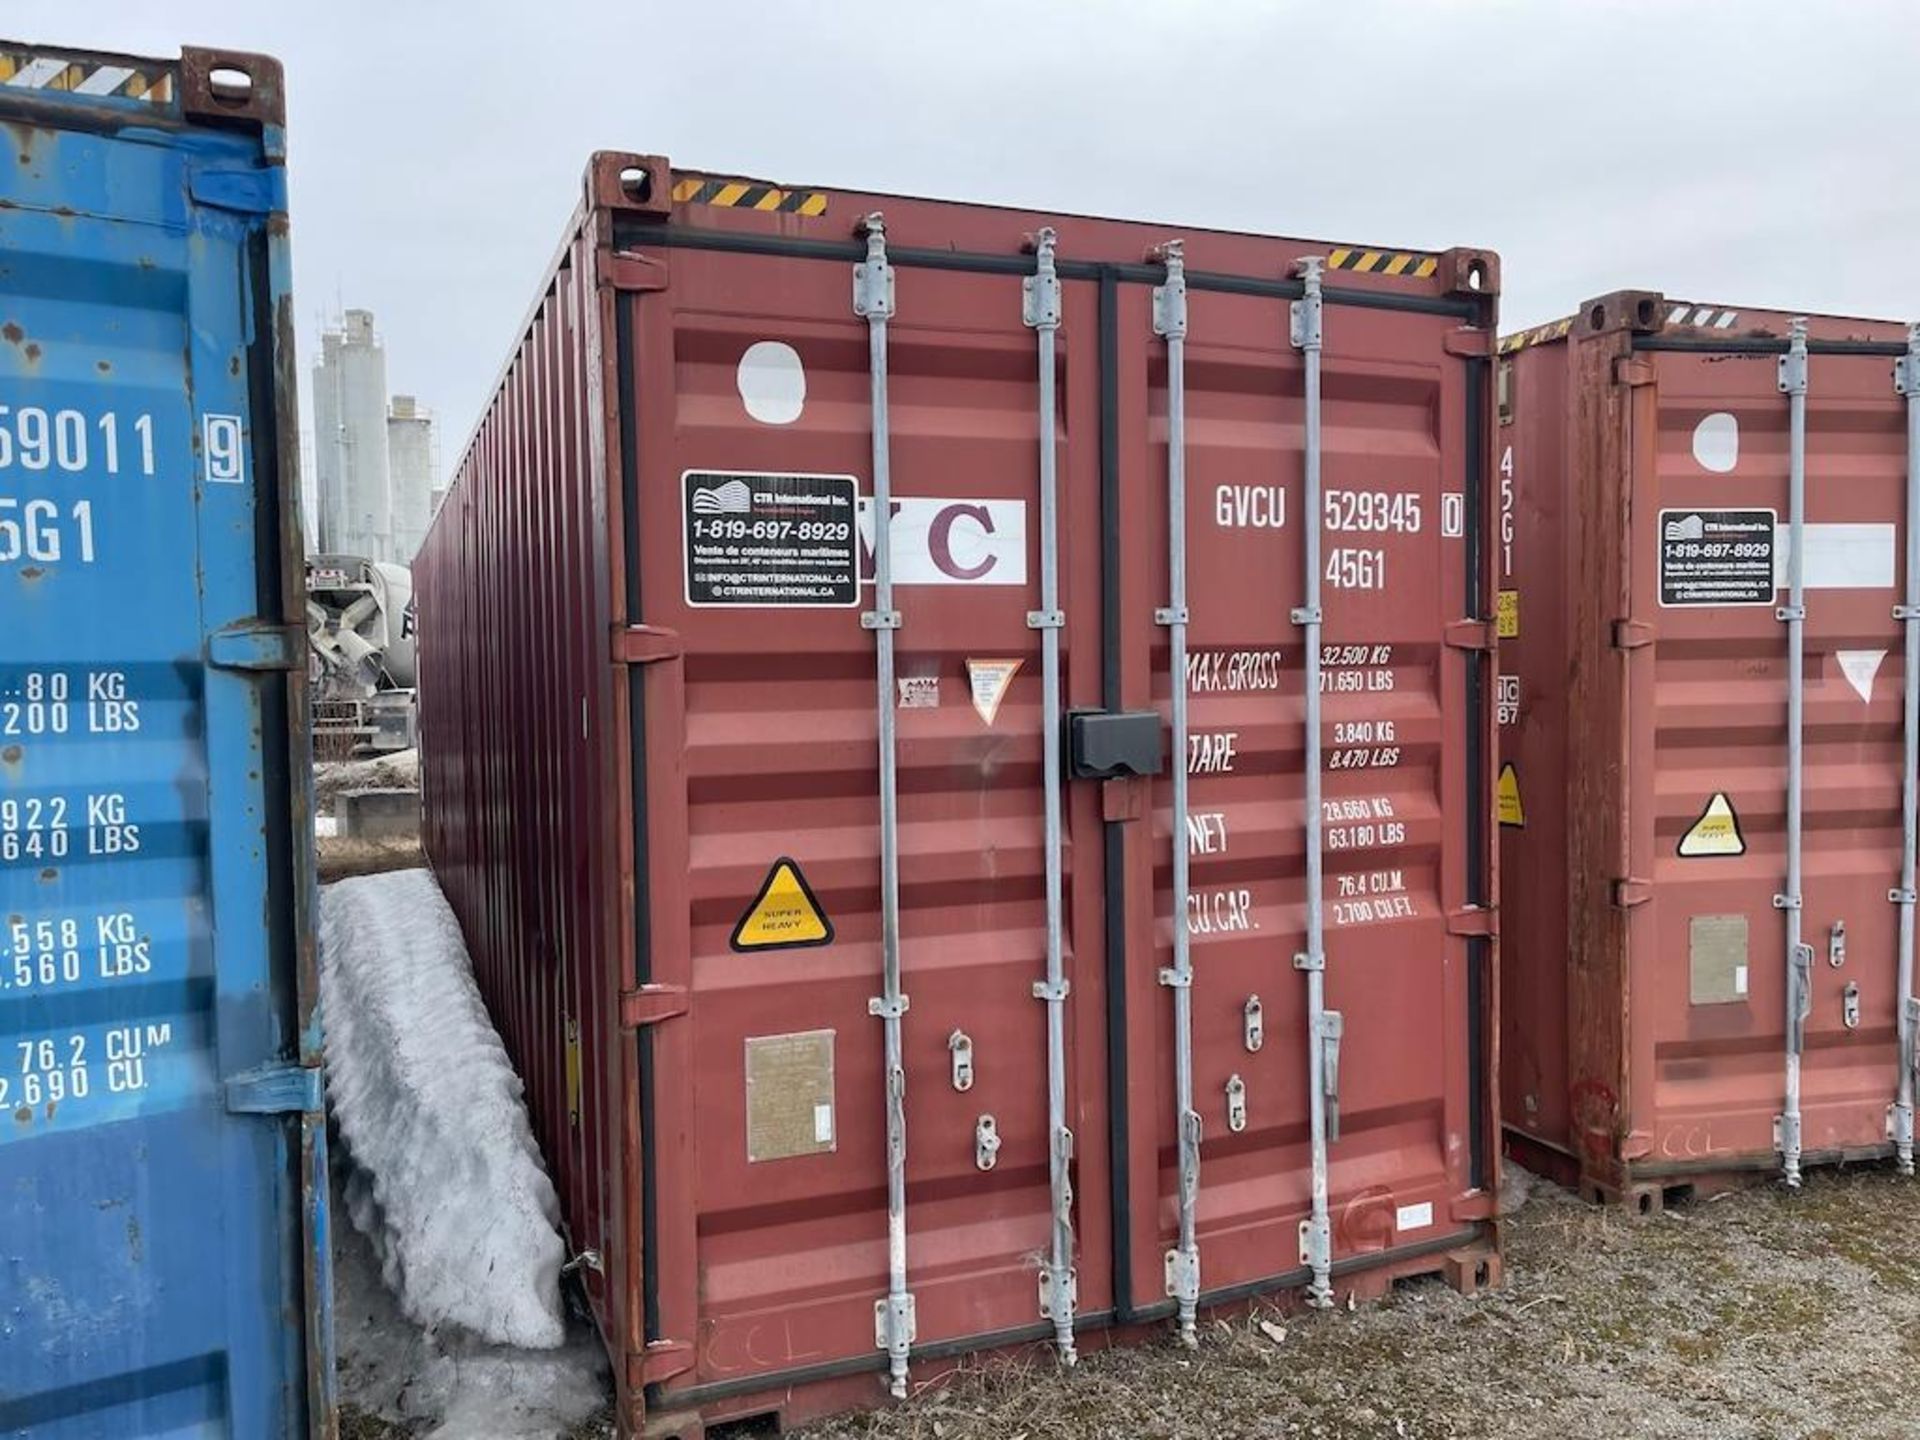 40 FT SEA CONTAINER, EXCLUDING CONTENTS, DELAYED PICK UP UNTIL MAY 13 [14] [TROIS RIVIERES] *PLEASE